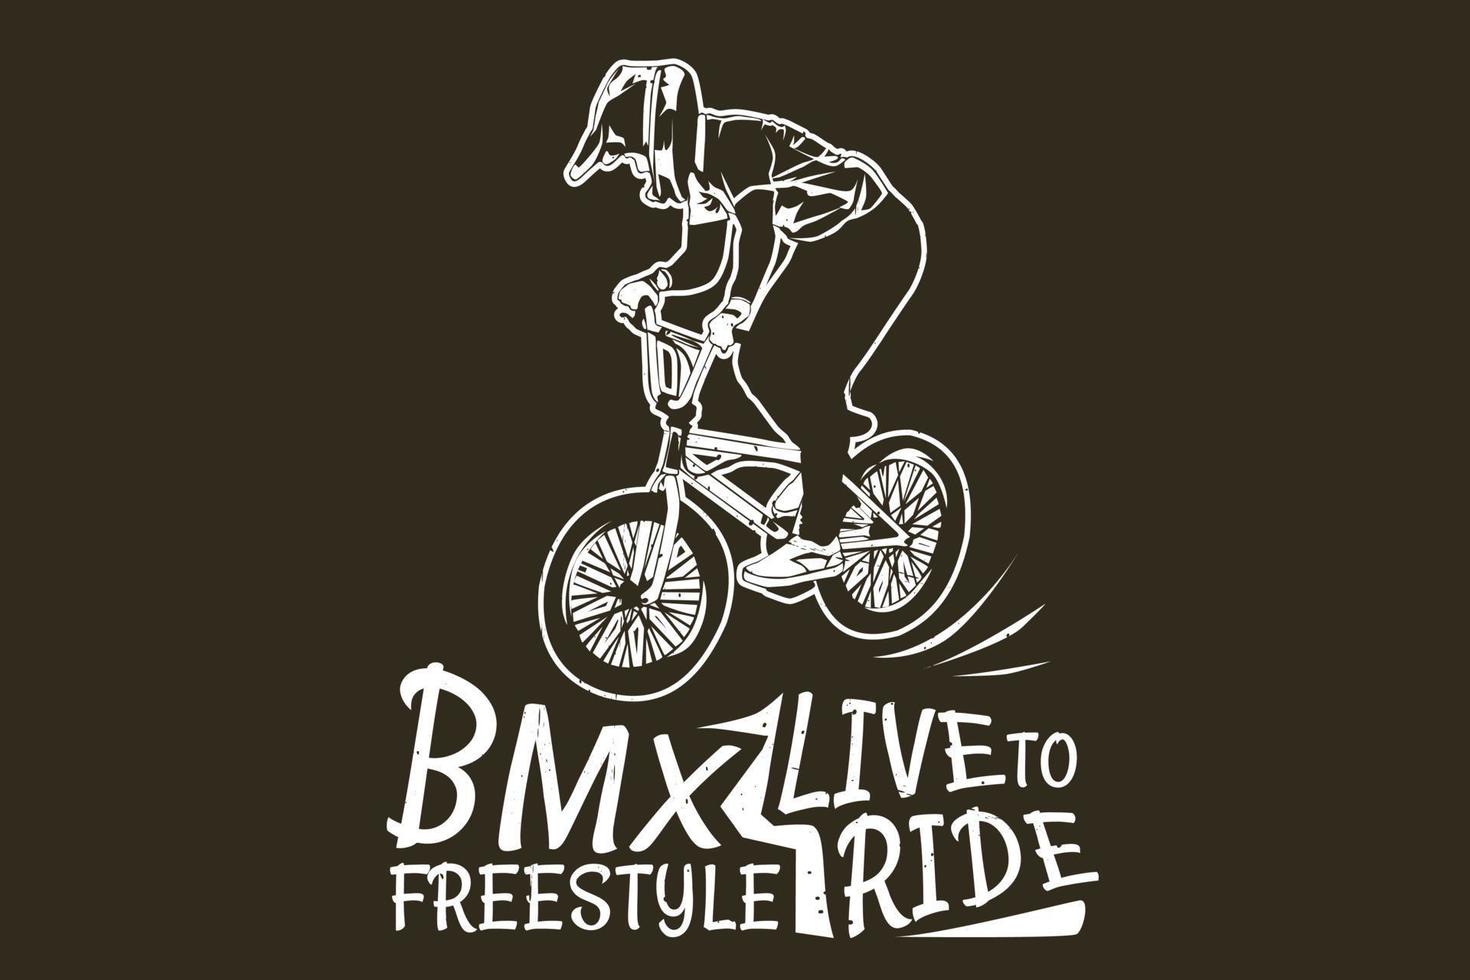 Life to ride bike freestyle silhouette design vector